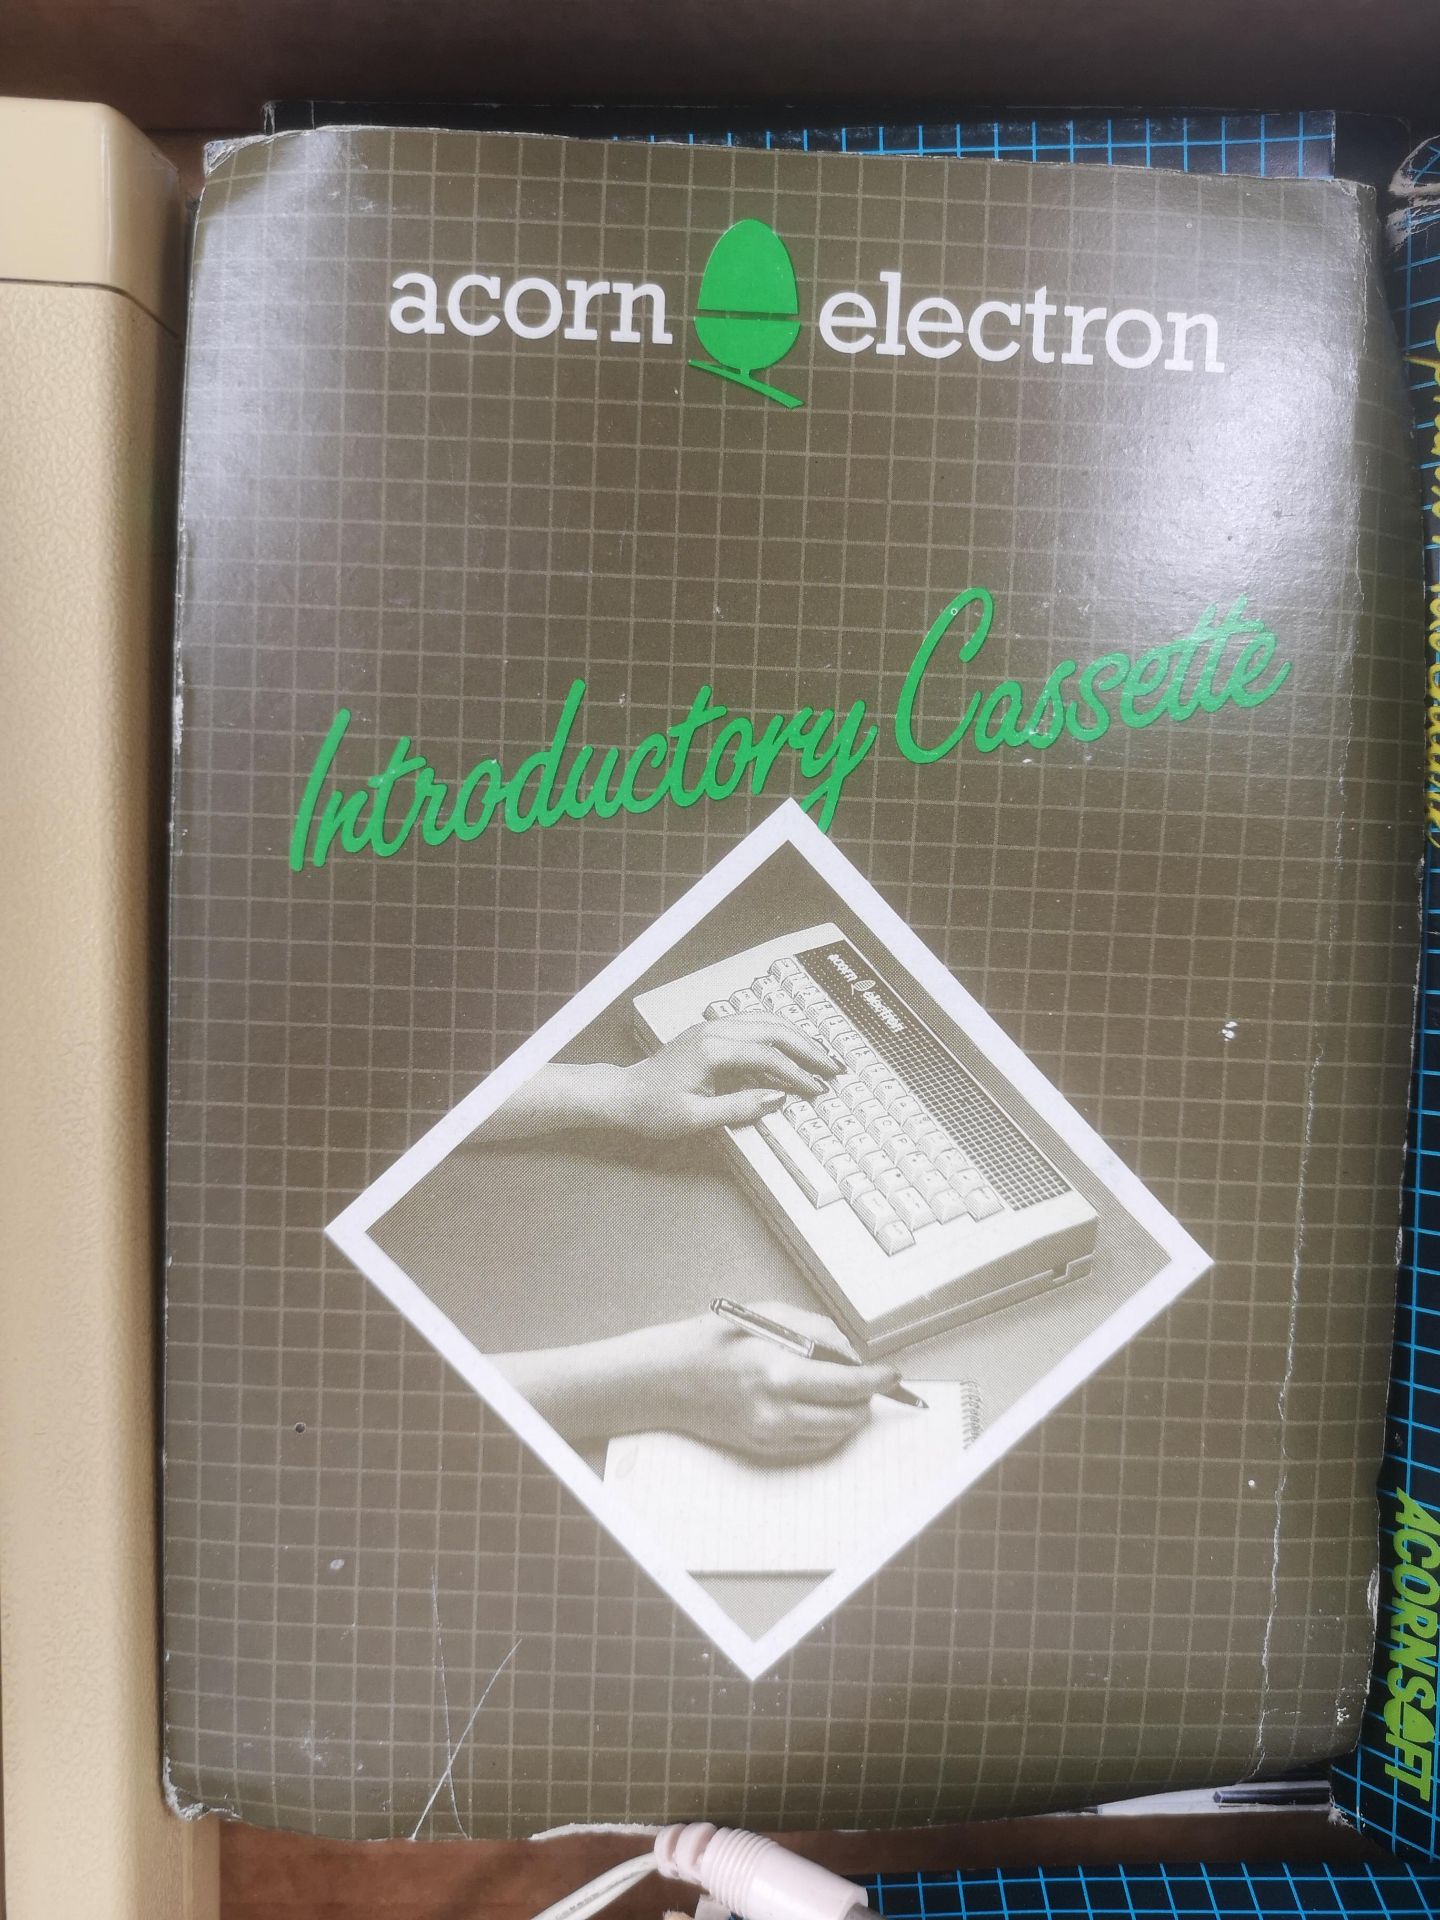 Acorn electron computer and games - Image 3 of 5